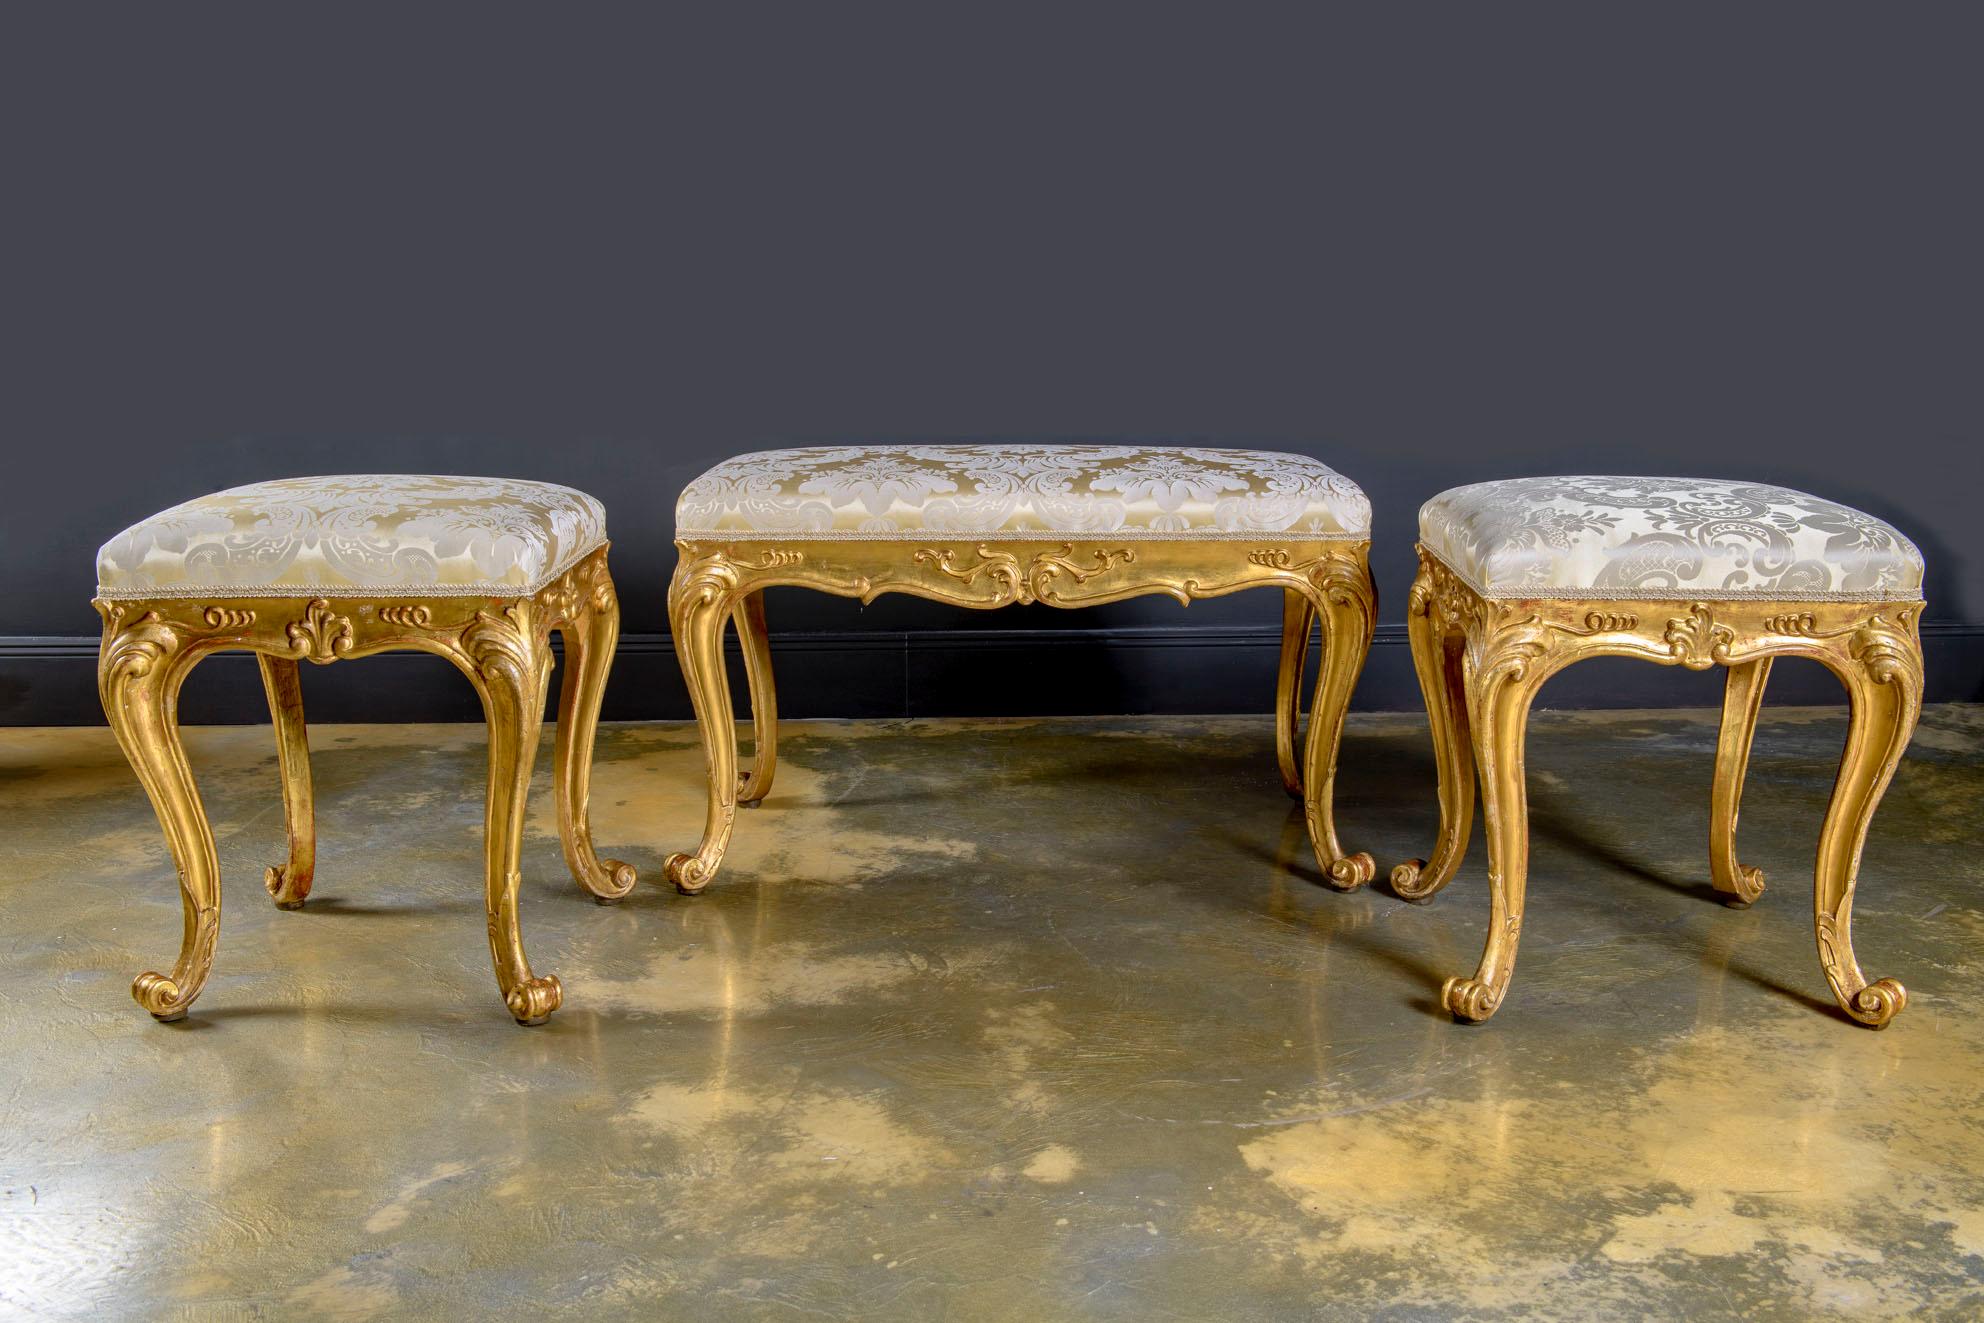 Beautiful and rare gilt wood bench or day bed made in the Louis XV style which adds a lot of charm to a classical or ecclectical style ambiance living room or entrance in the classical French style.
The very high quality and beauty of this work